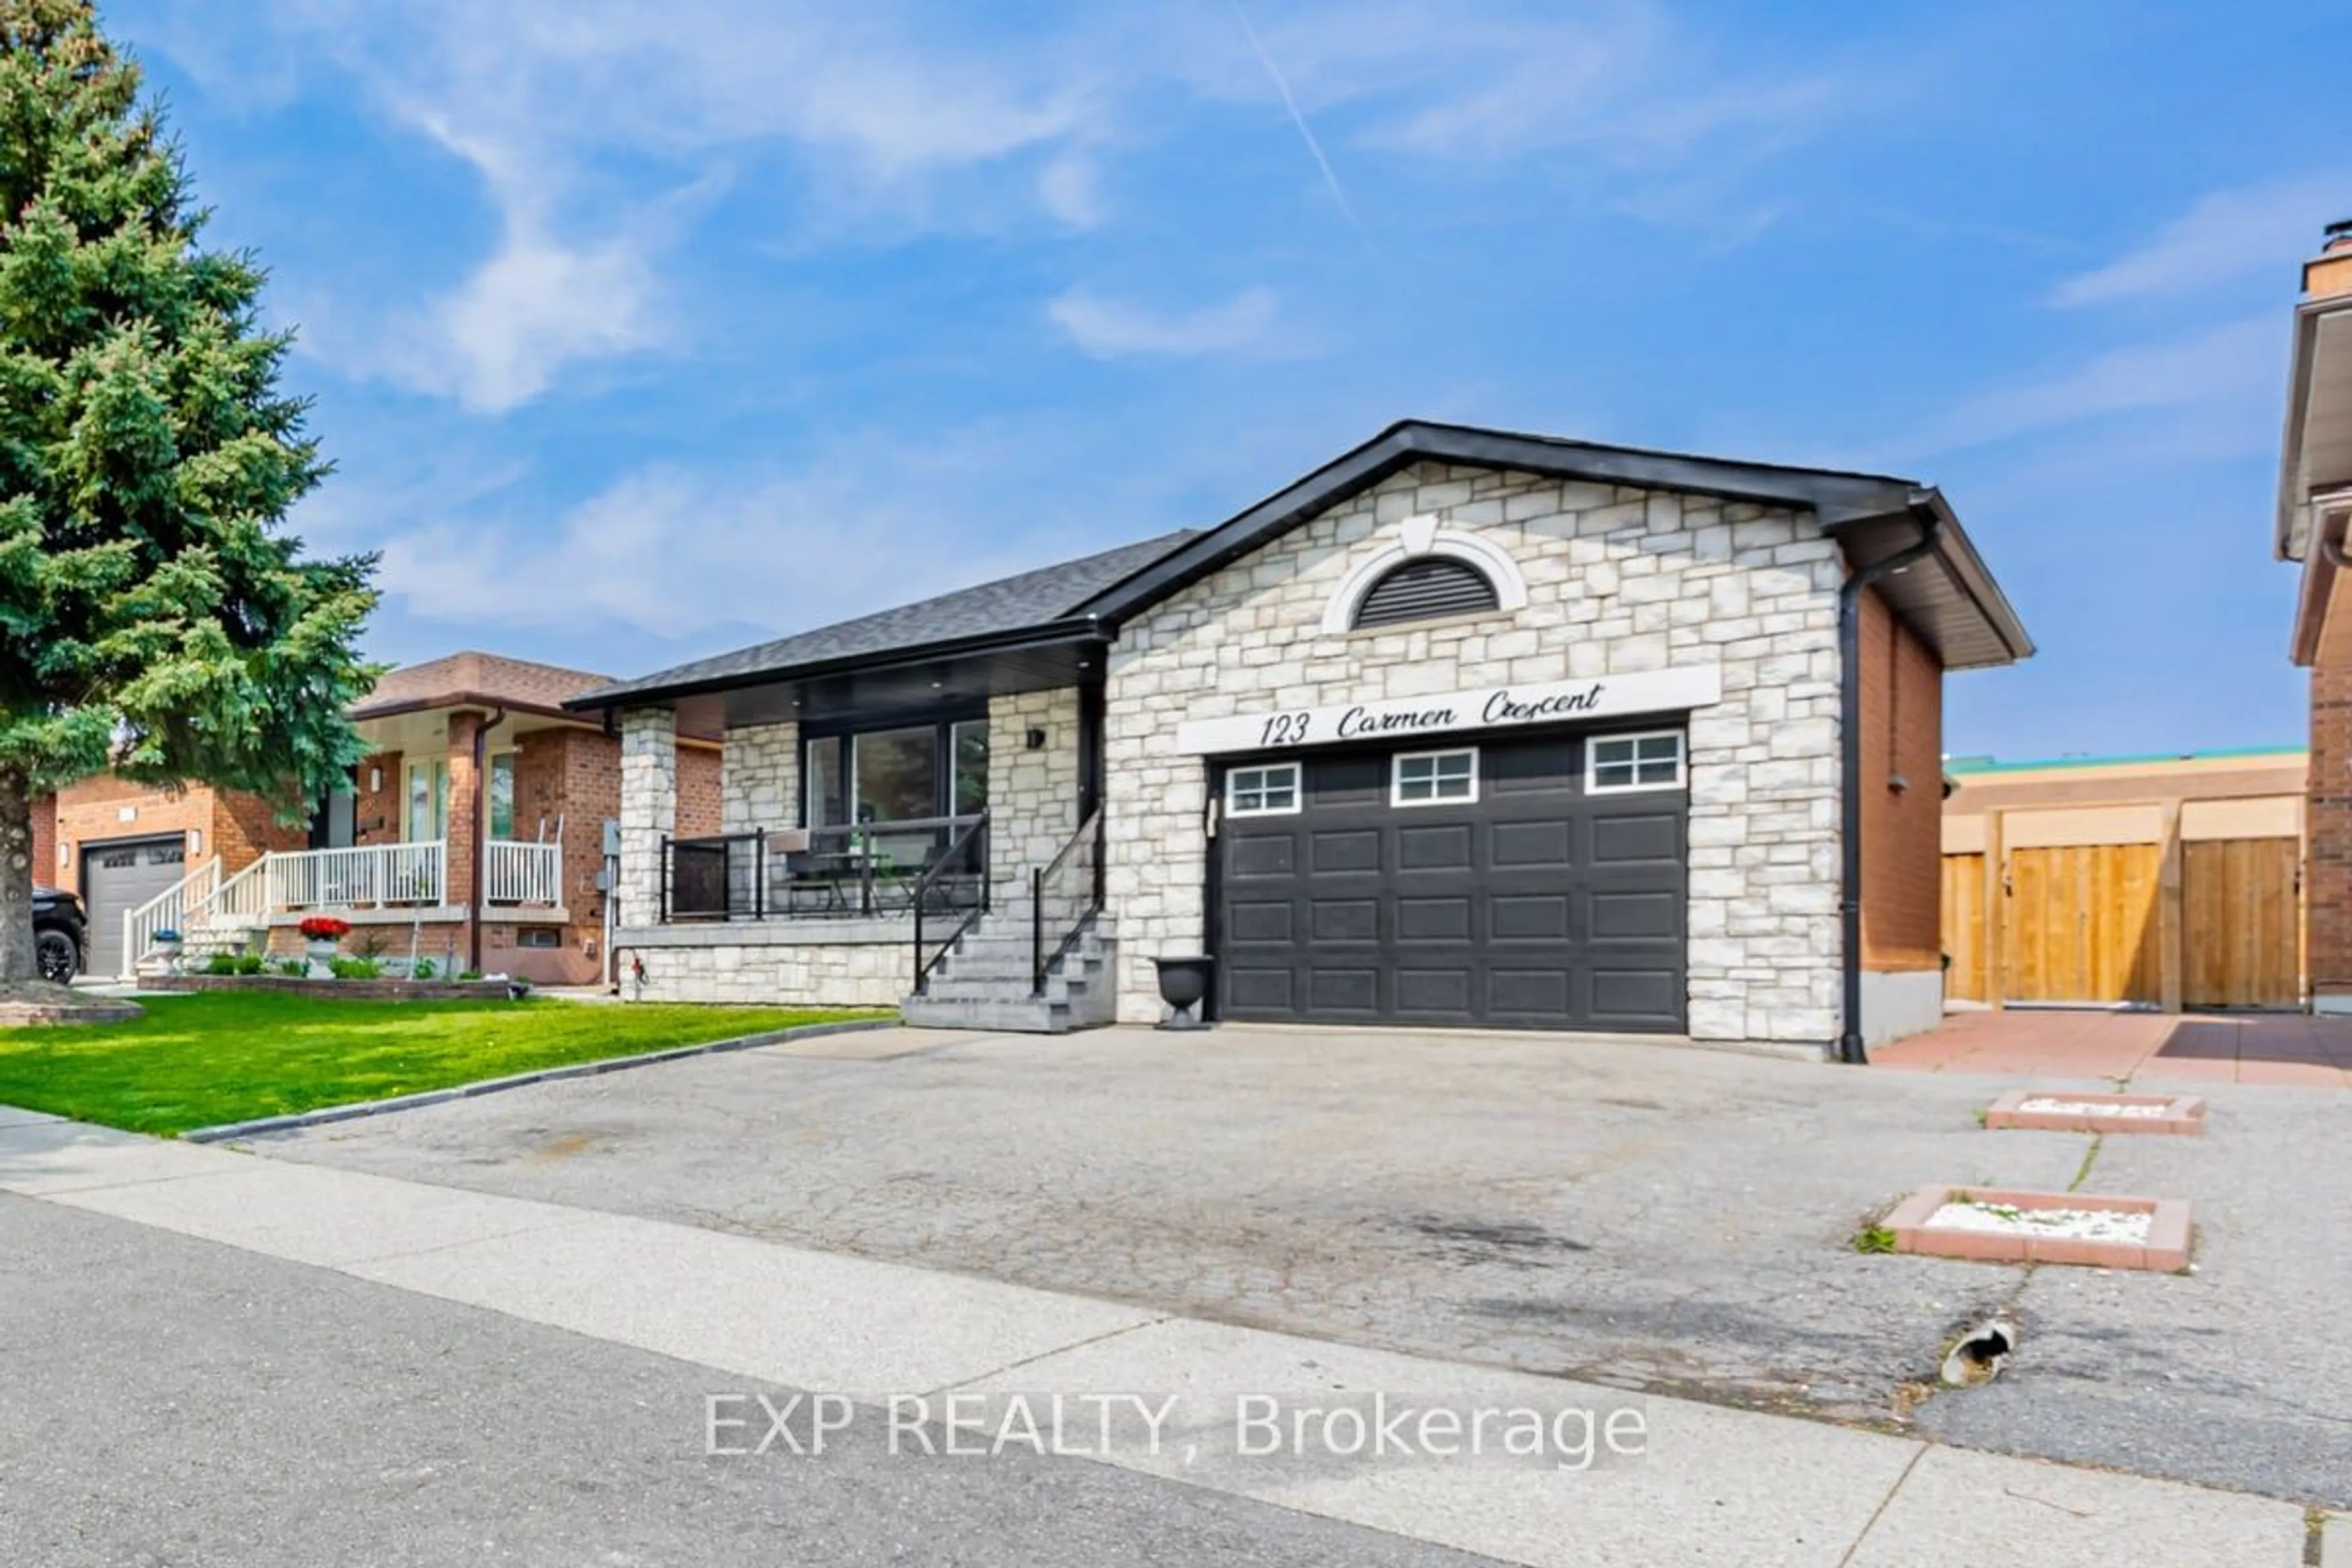 Home with brick exterior material for 123 Carmen Cres, Vaughan Ontario L4L 5P7